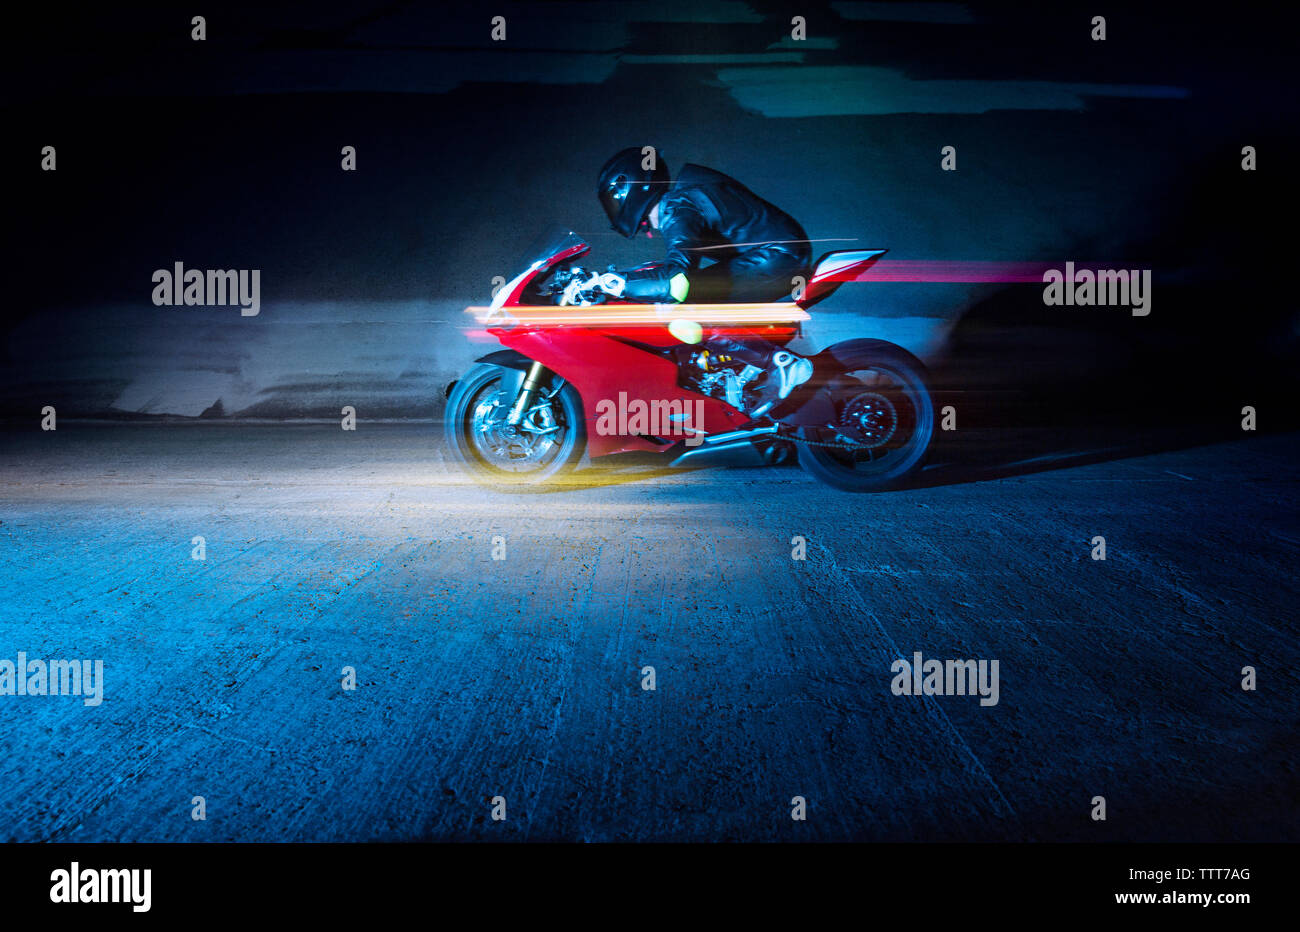 Biker riding on road by wall Banque D'Images